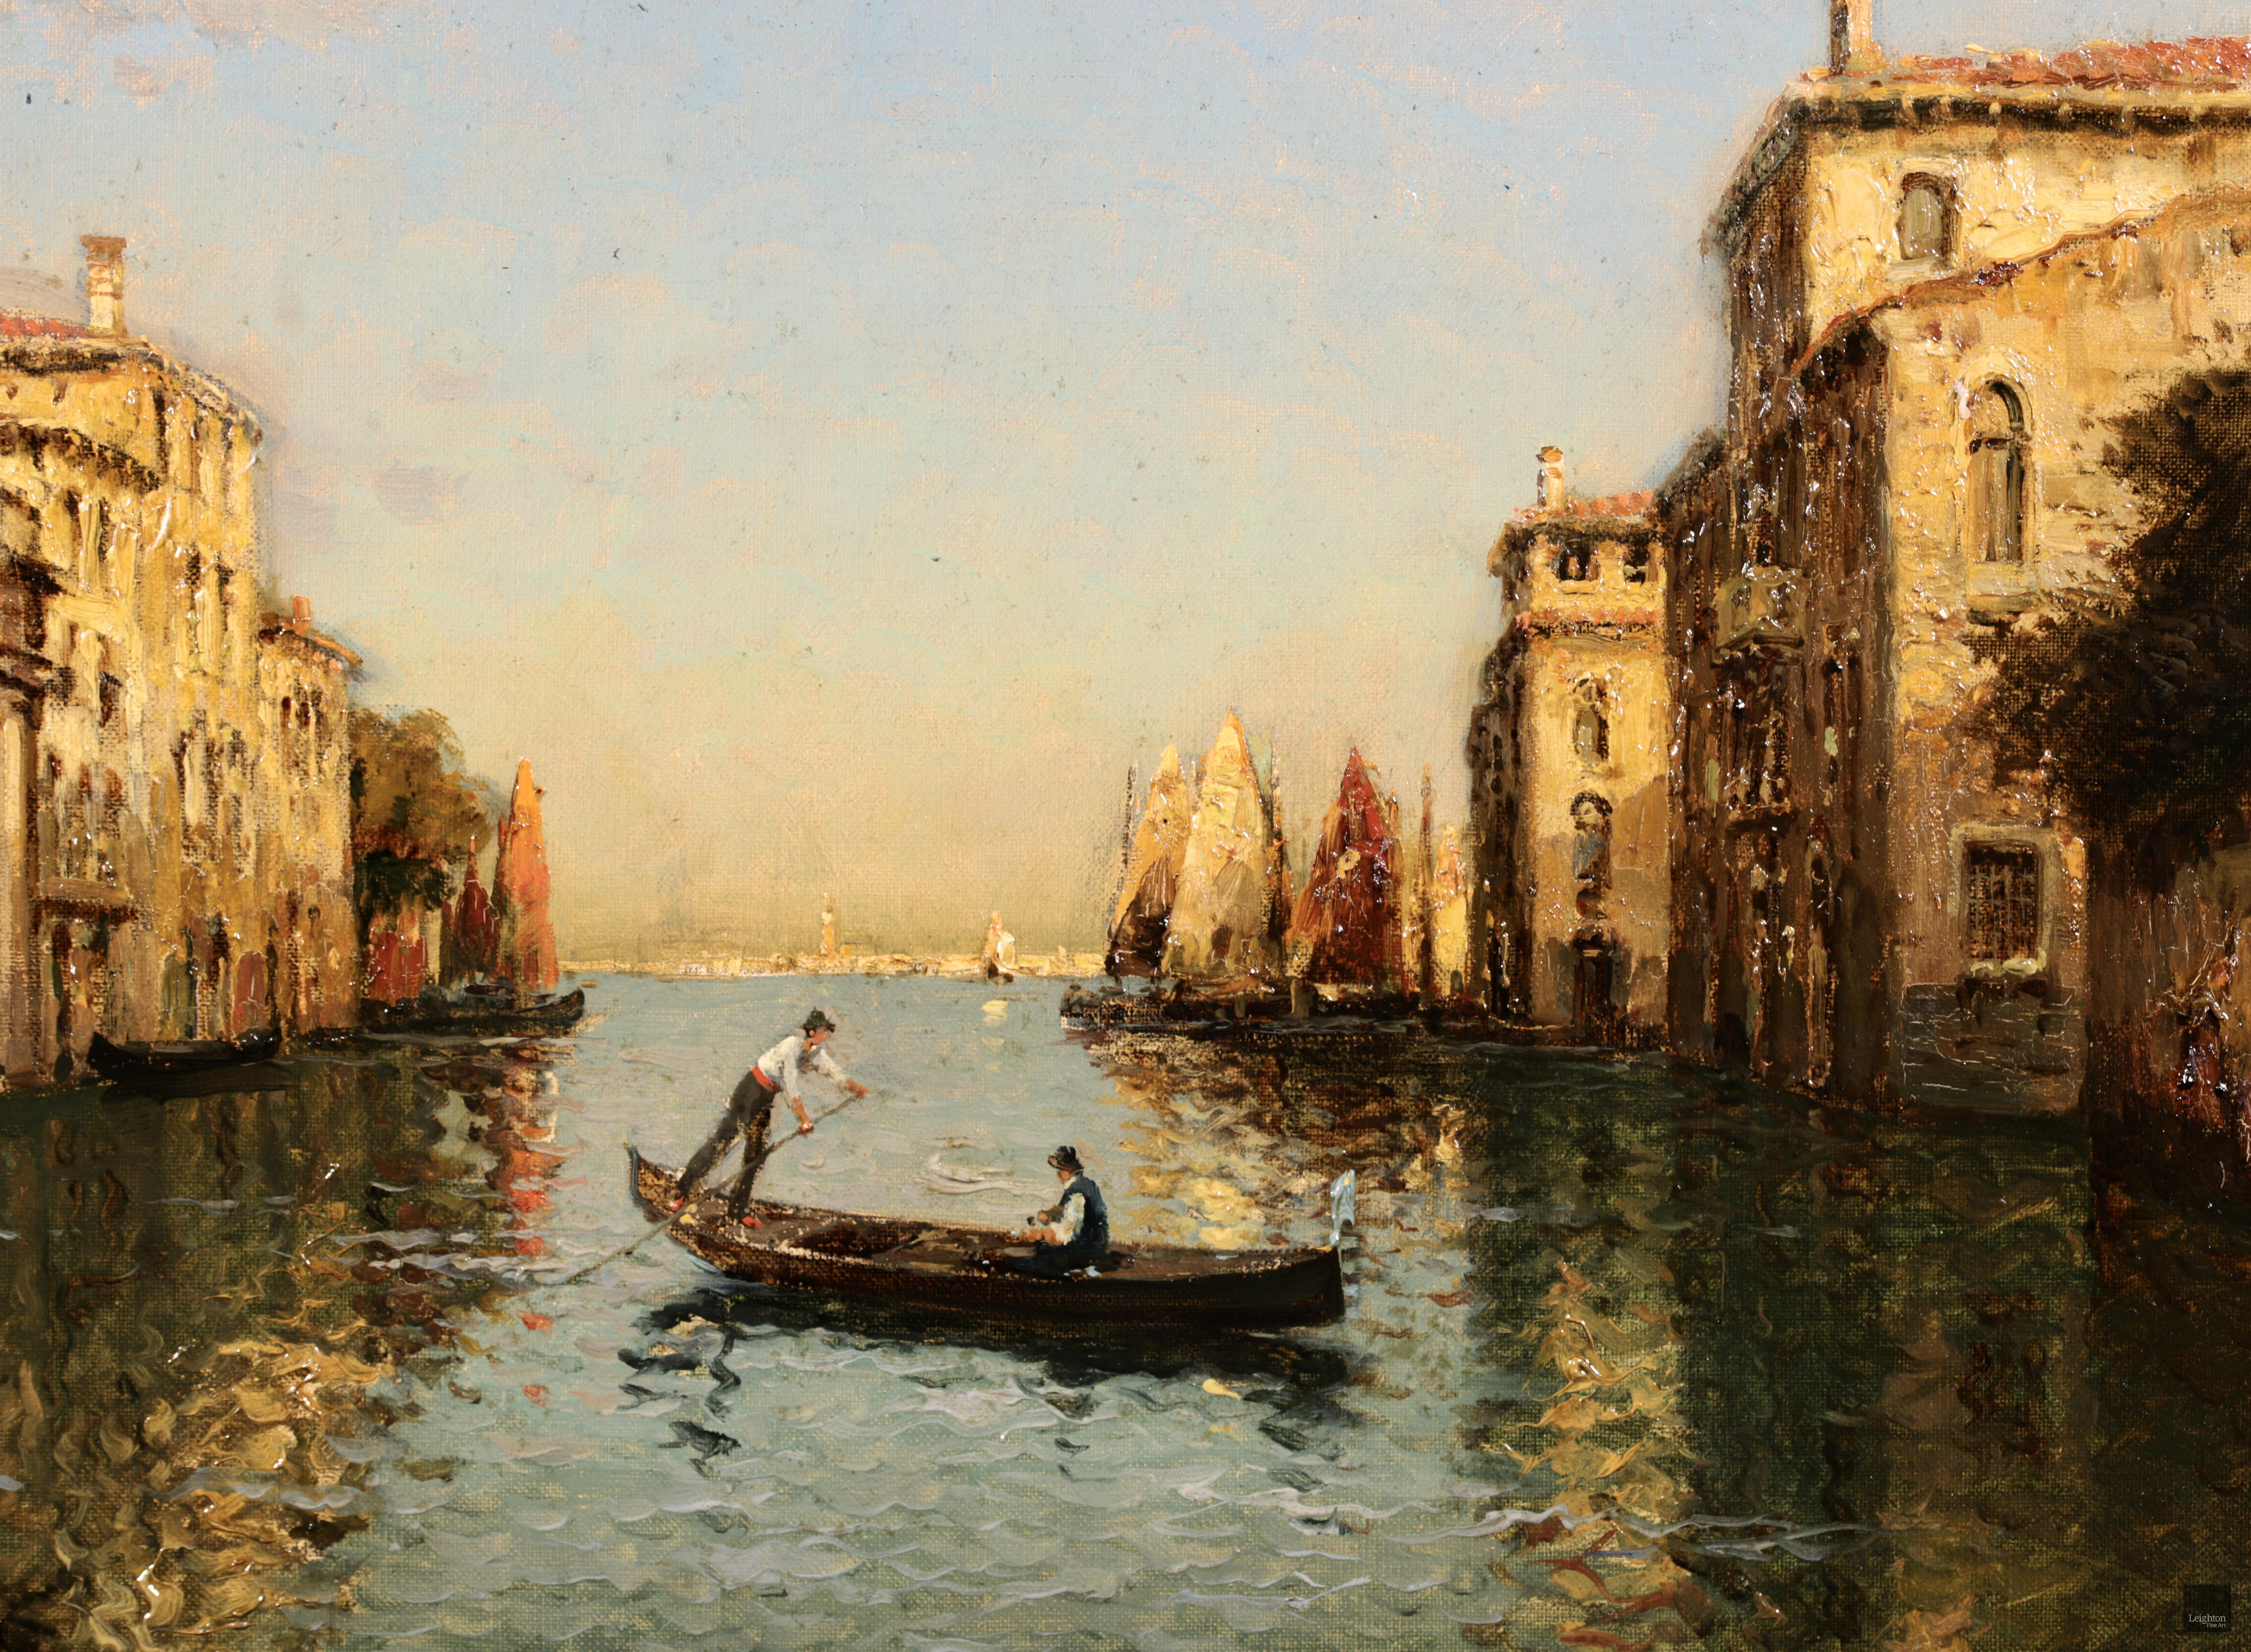 Gondoliers on a canal - Venice - Impressionist Oil, Landscape by Antoine Bouvard 3